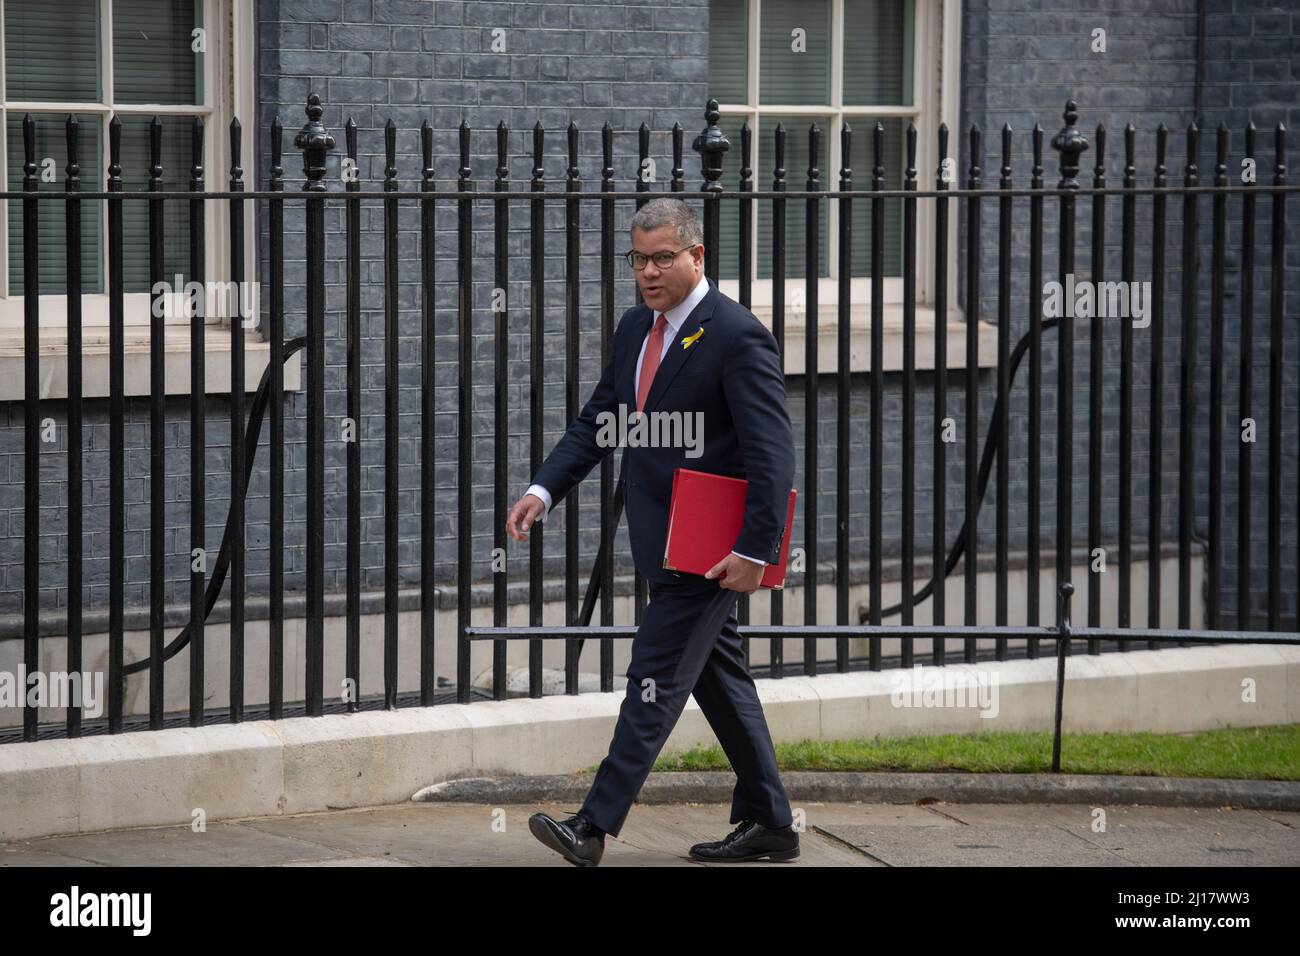 Downing Street, London, UK. 23 March 2022. Alok Sharma MP, COP26 President, in Downing Street for weekly cabinet meeting. Credit: Malcolm Park/Alamy Live News. Stock Photo